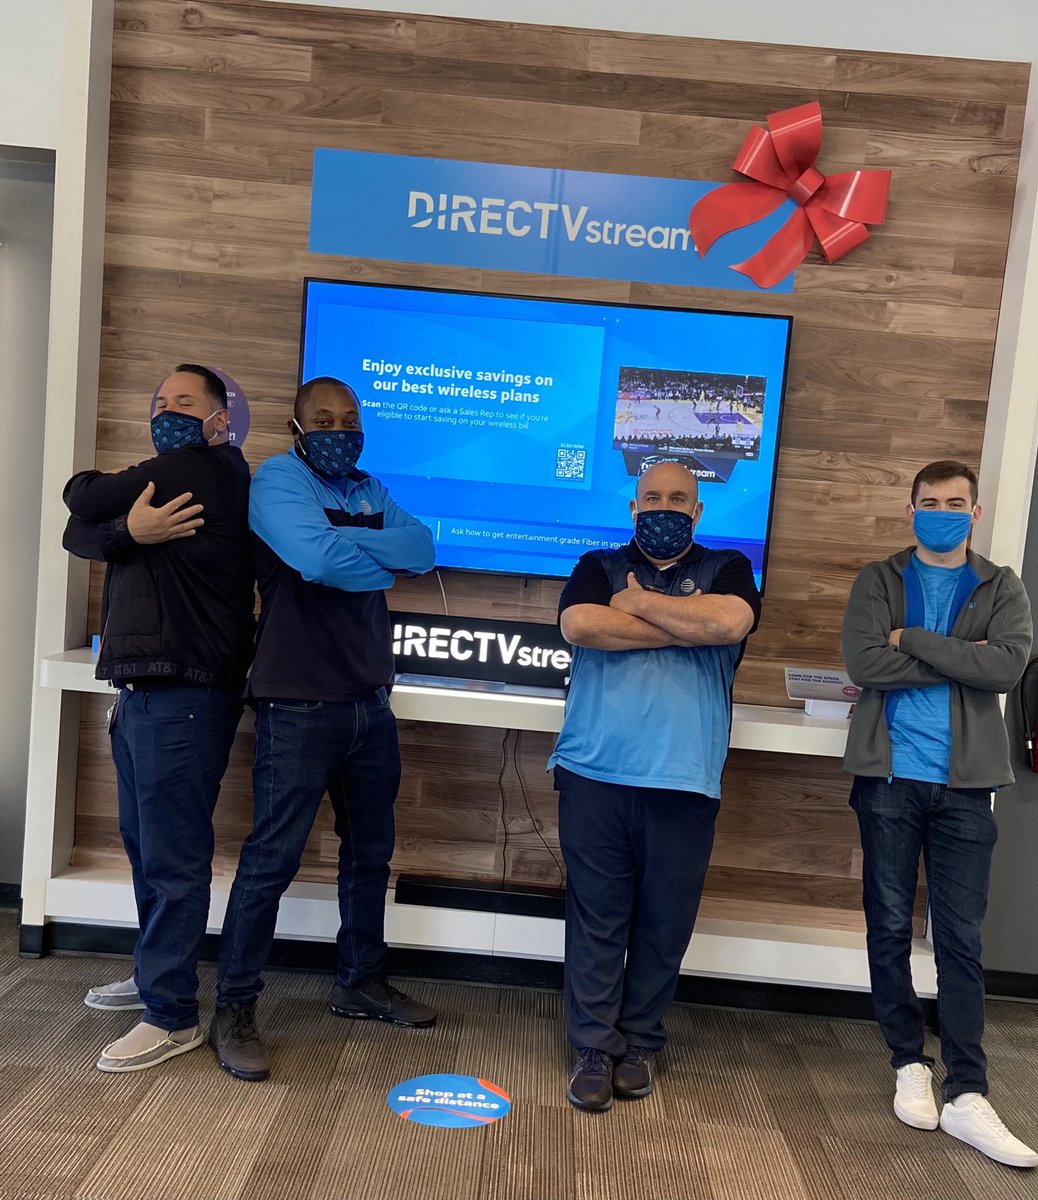 RSC appreciation day!

We appreciate all you do for our customer’s experience and for our team’s performance!@TSouthsideStore 

#OneFlorida #LifeAtATT